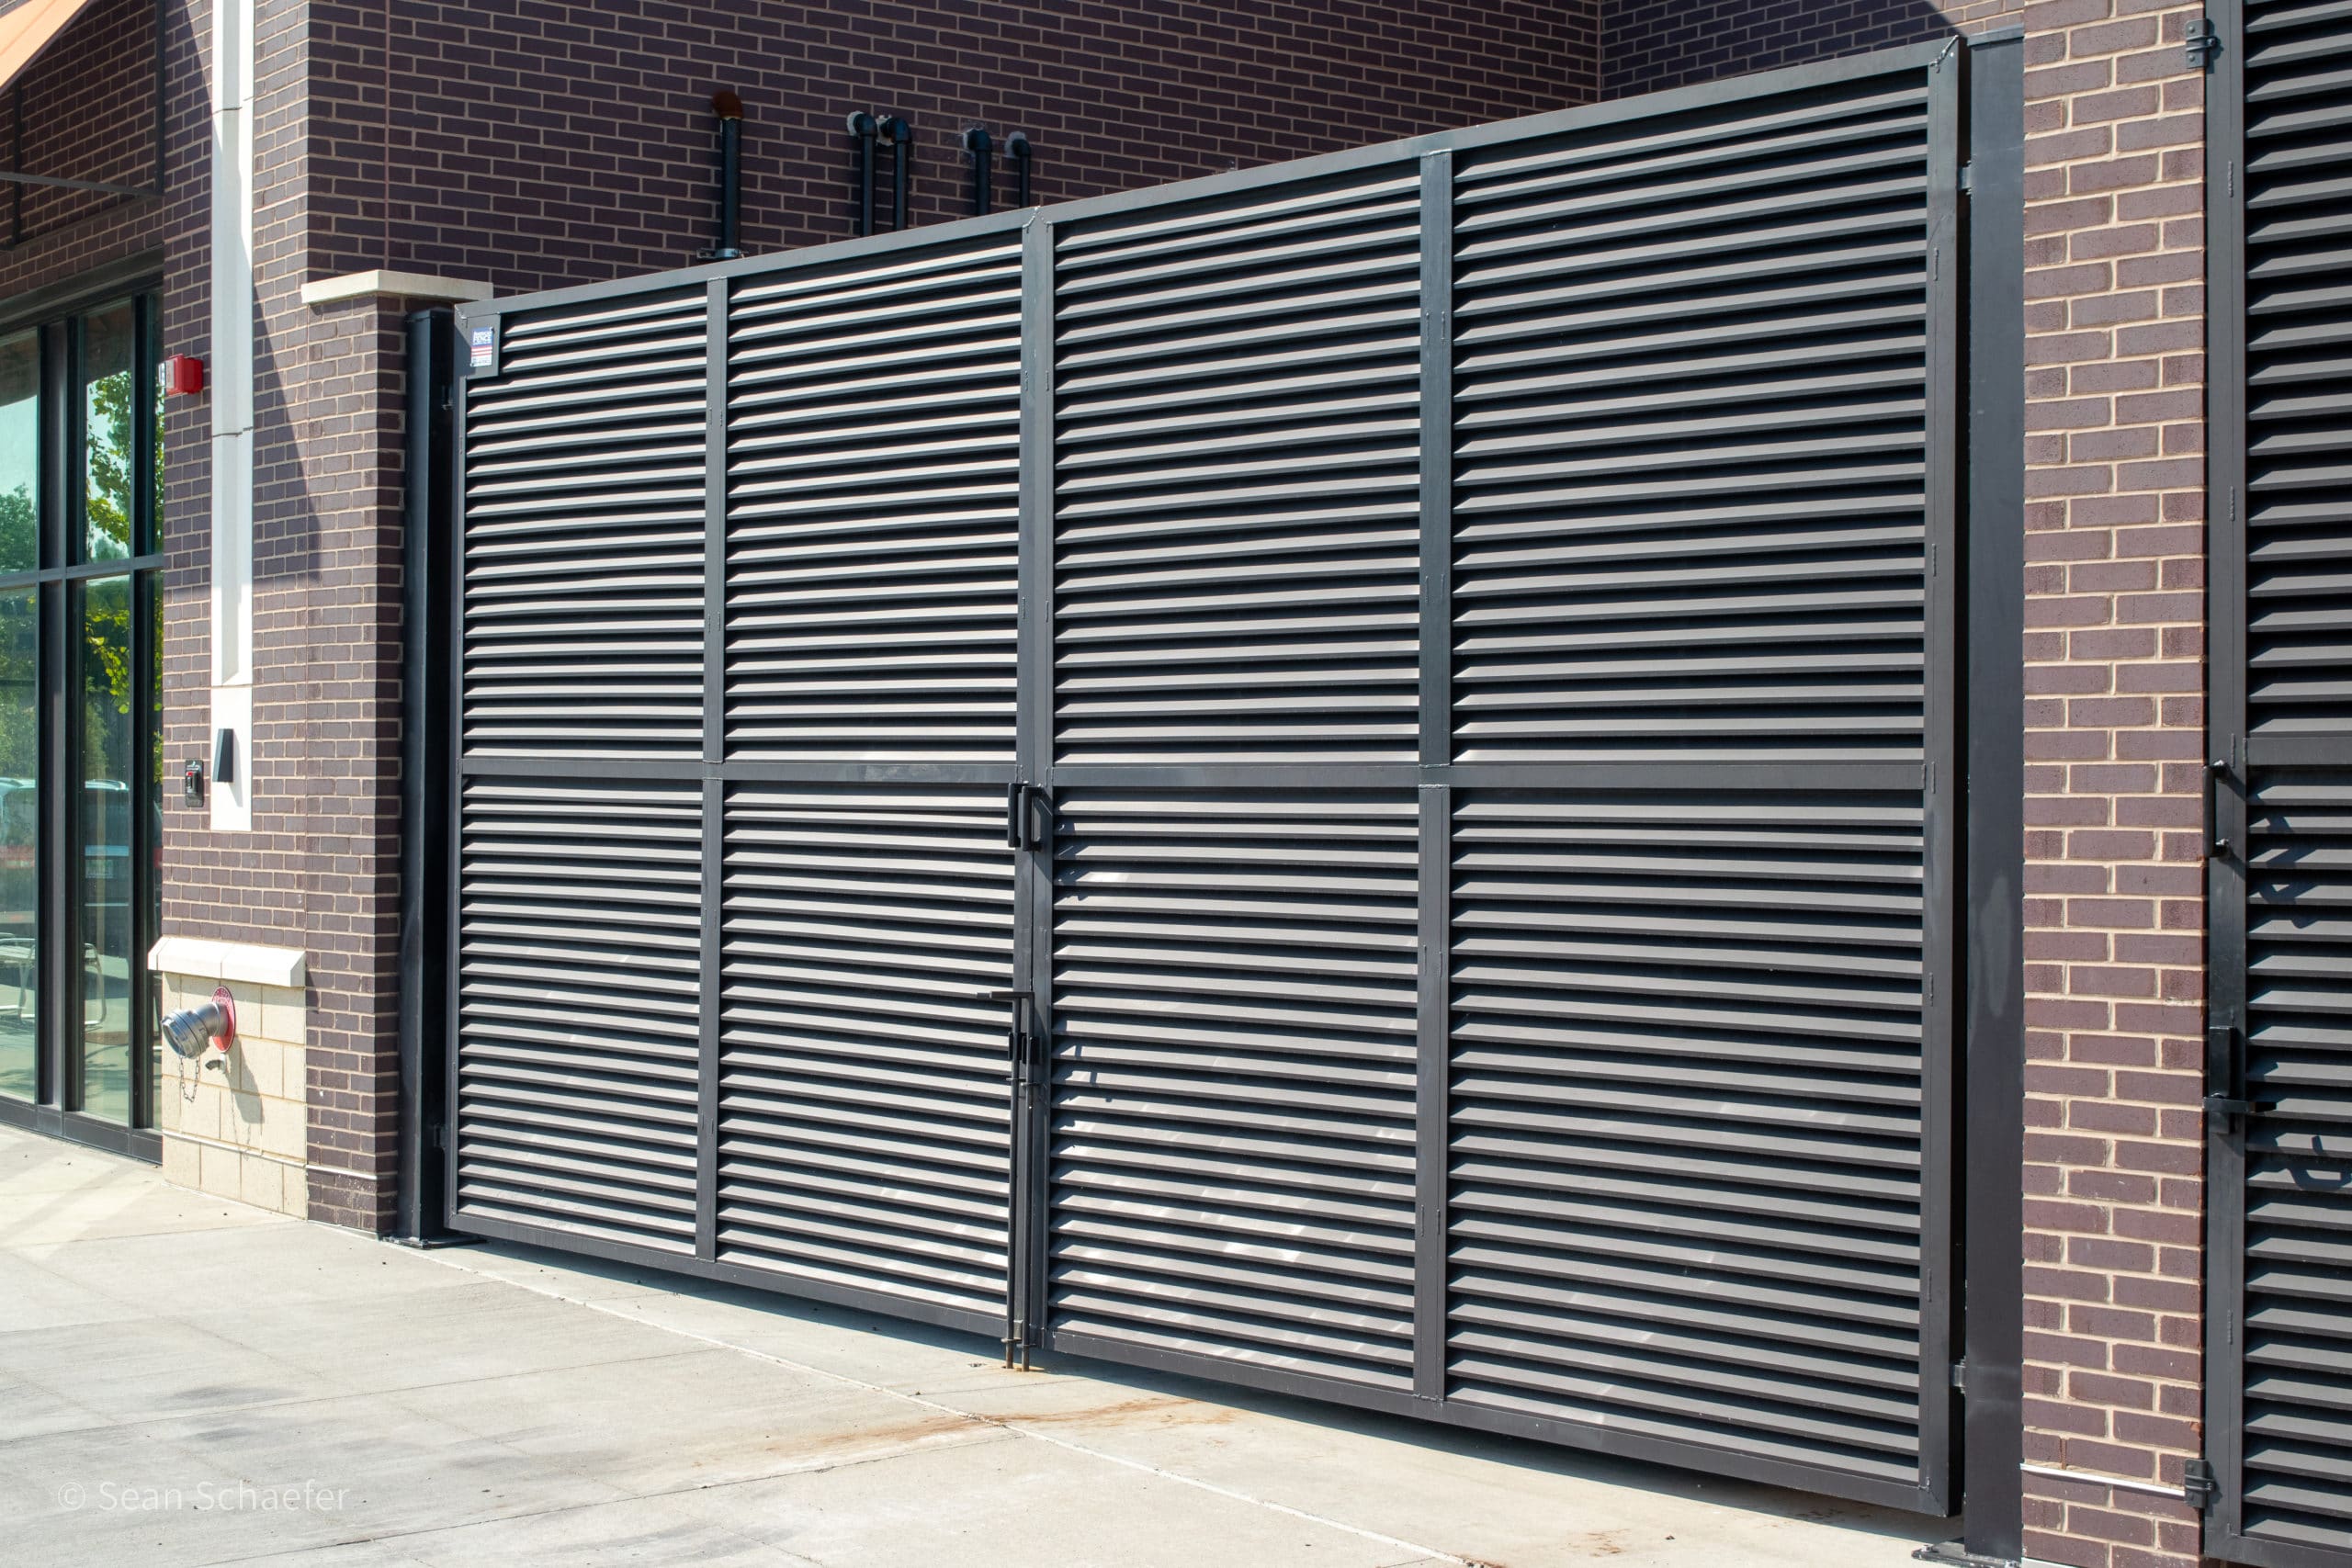 Image of commercial AmeriLouver® dumpster gates at Woodward Corners by Beaumont